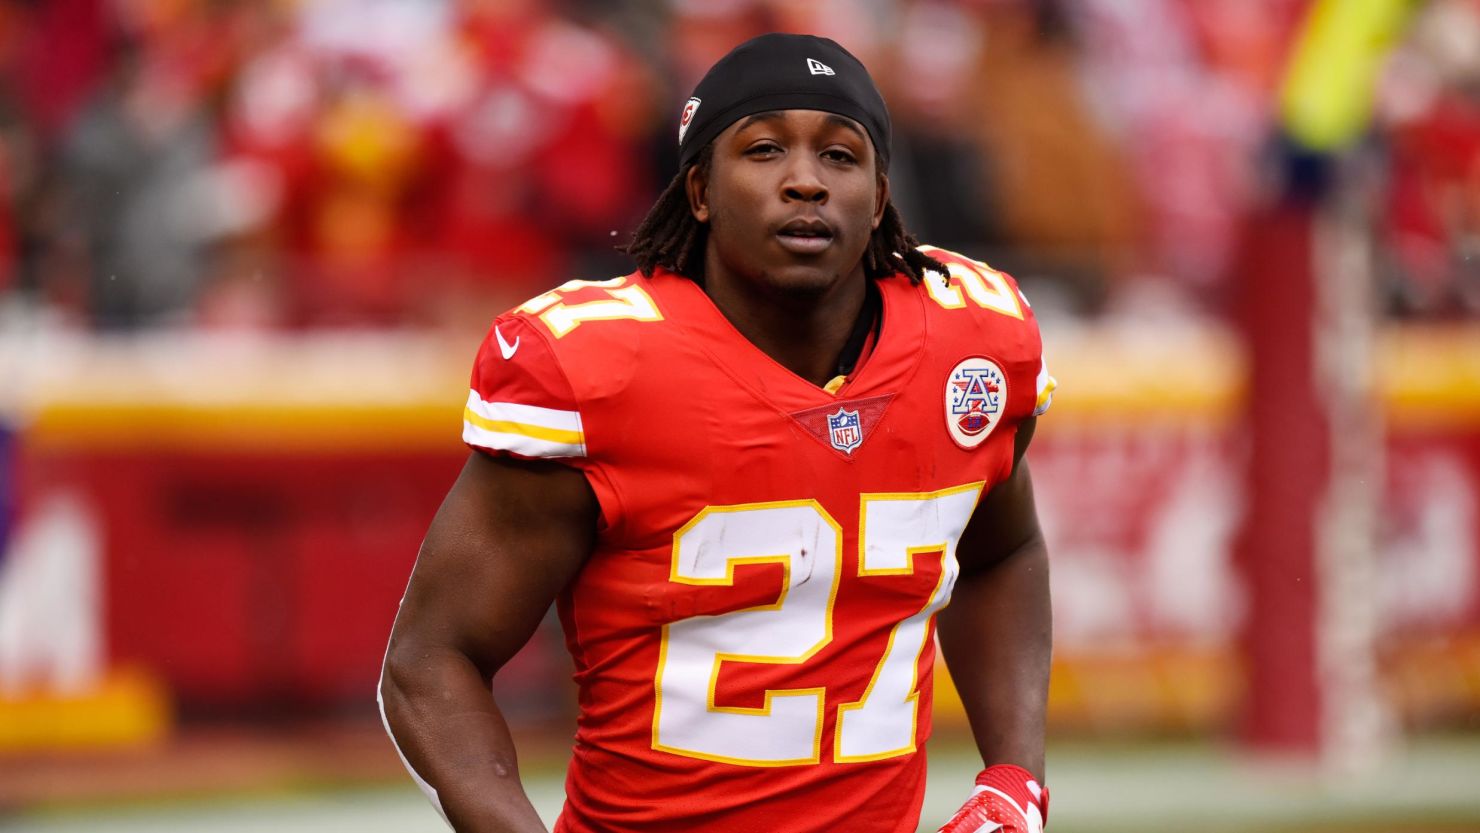 Kareem Hunt signed with the Cleveland Browns in February after the Kansas City Chiefs released him.